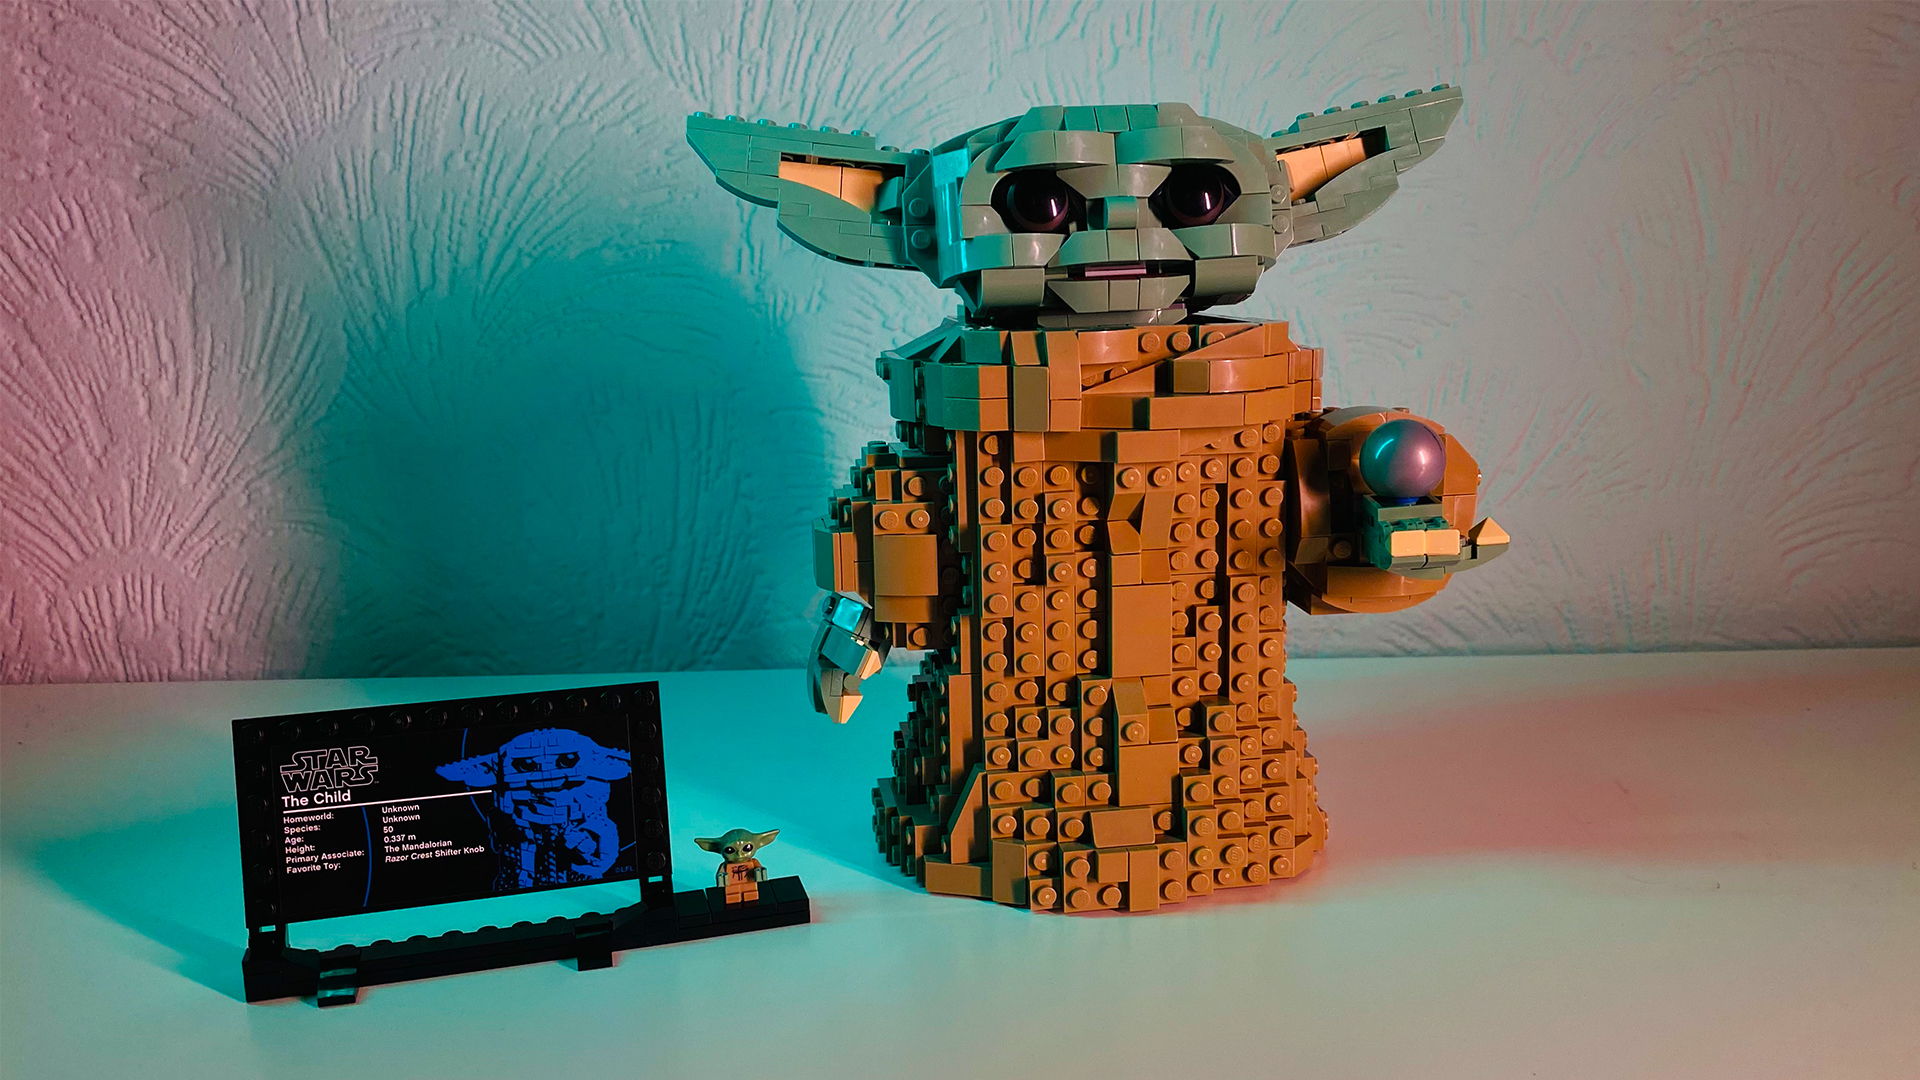 Lego Star Wars The Child set review: image shows Lego Star Wars The Child set